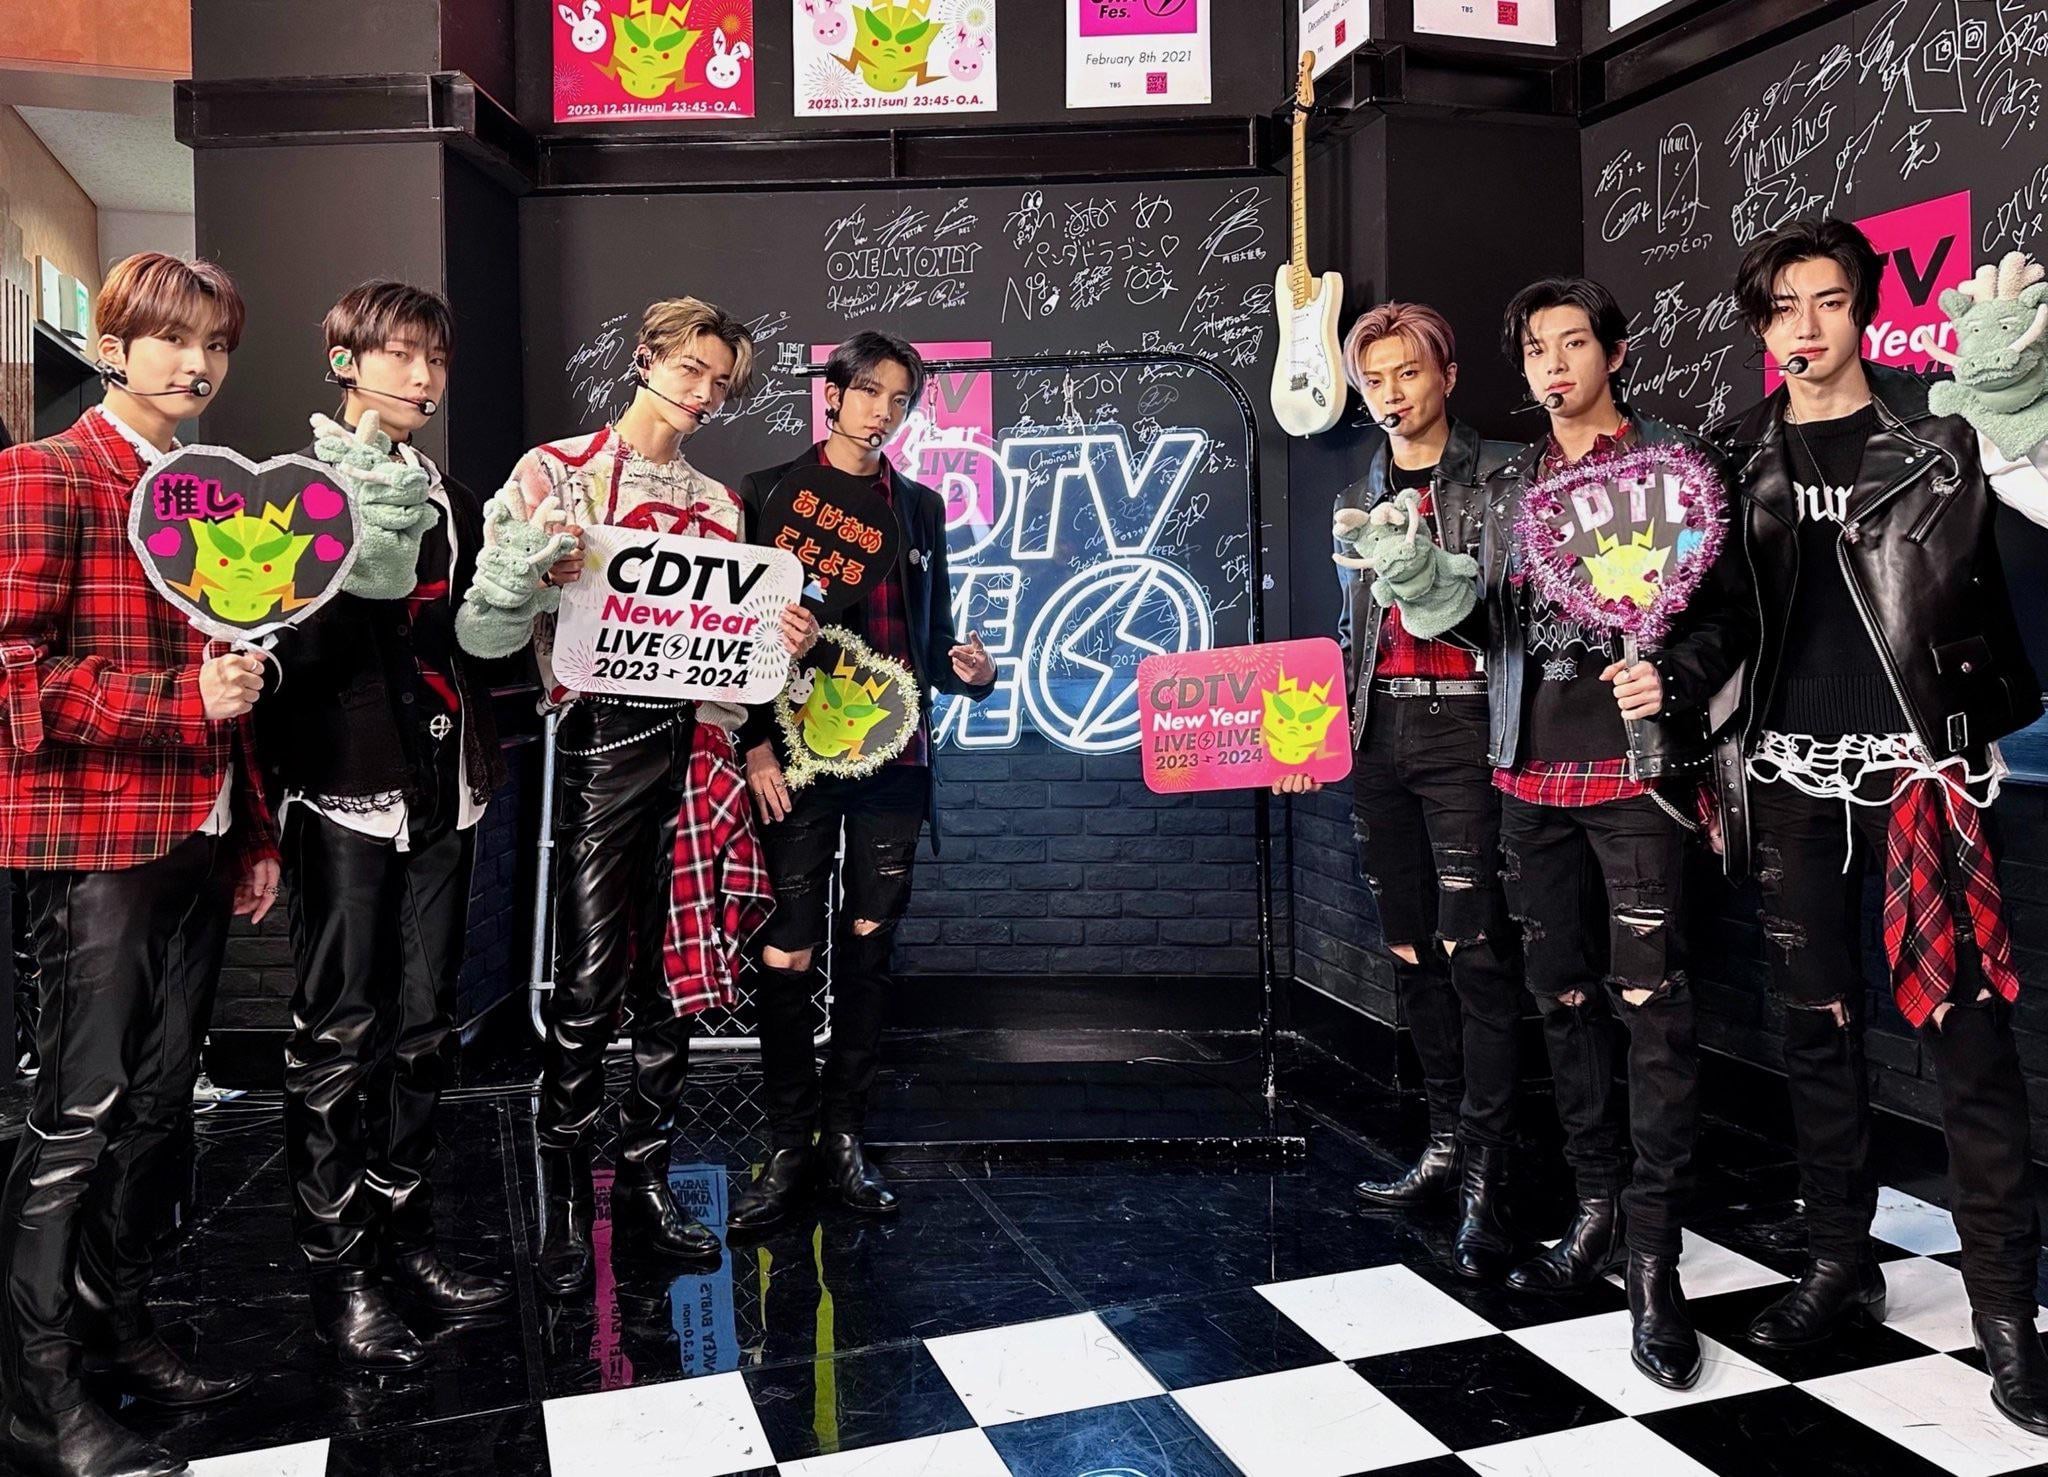 240101 TBS CDTV Twitter Update With ENHYPEN - CDTV LIVE New Years Eve Special Photo